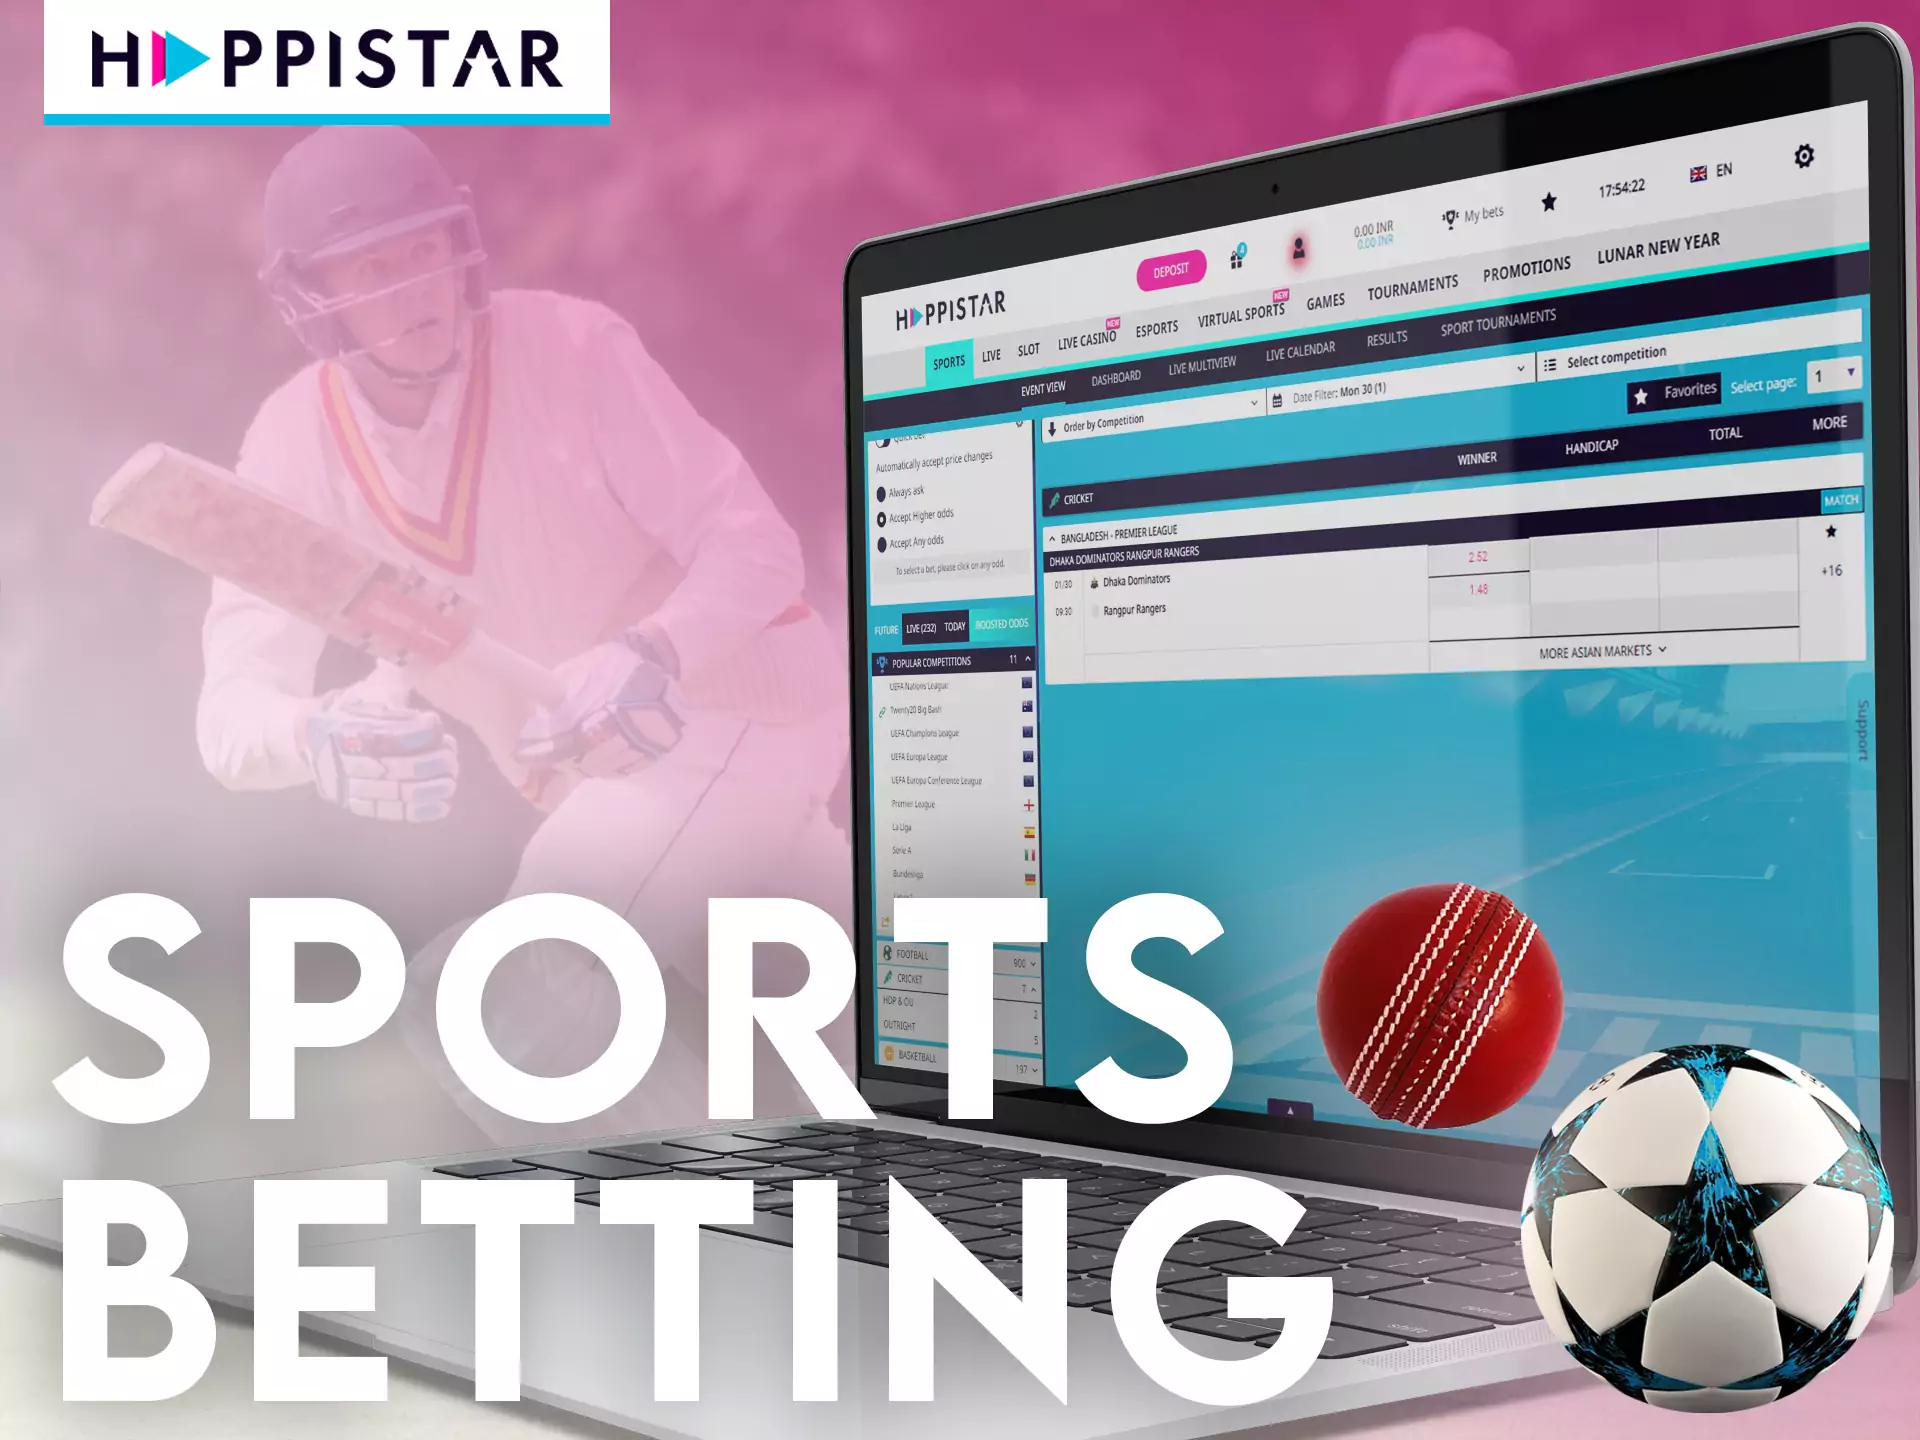 On Happistar, you find lots of sports events.